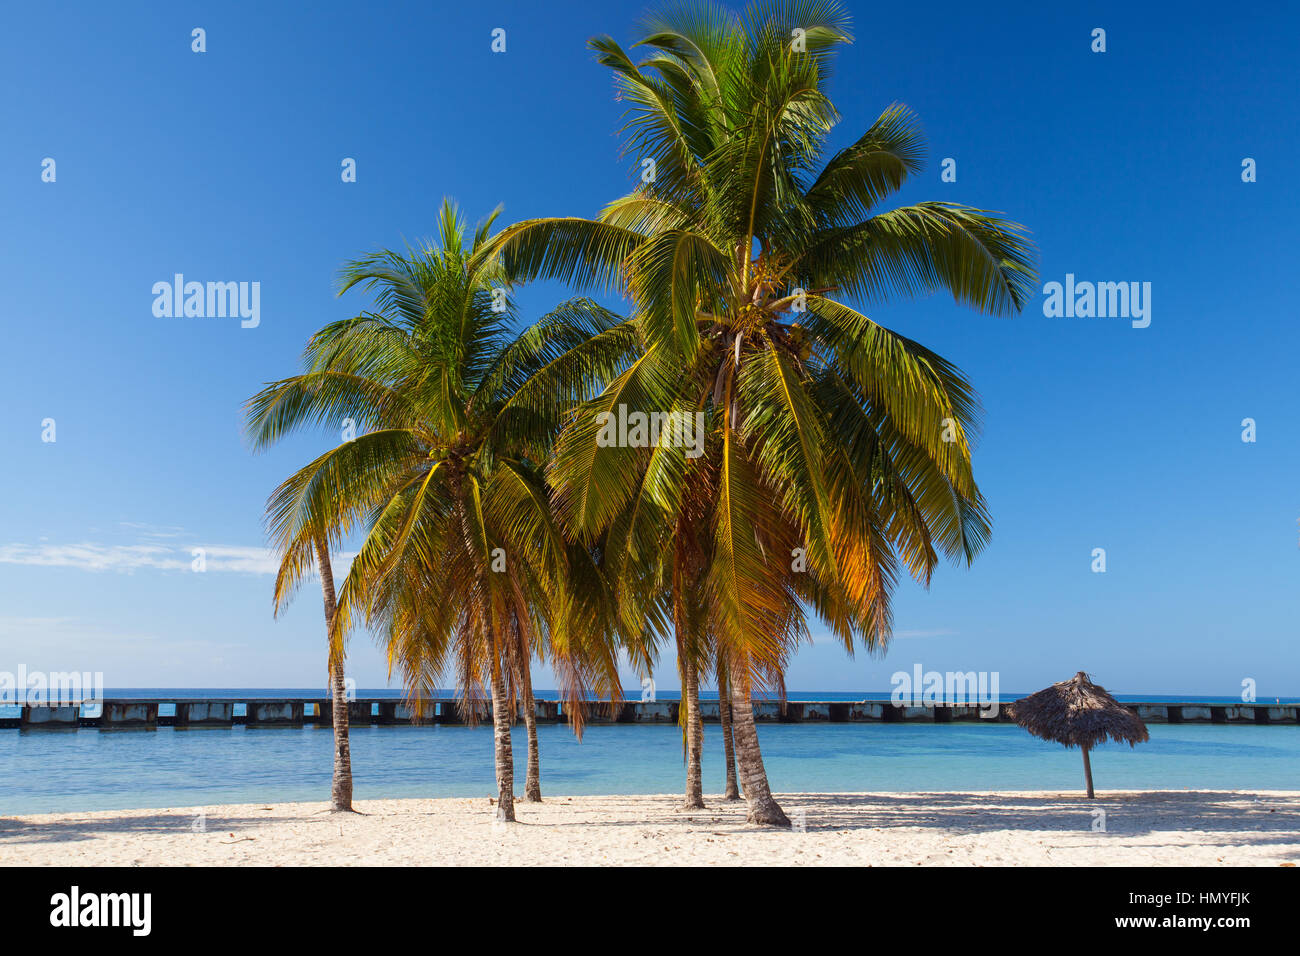 On the beach Playa Giron, Cuba. This beach is famous for its role during the Bay of Pigs invasion. Stock Photo